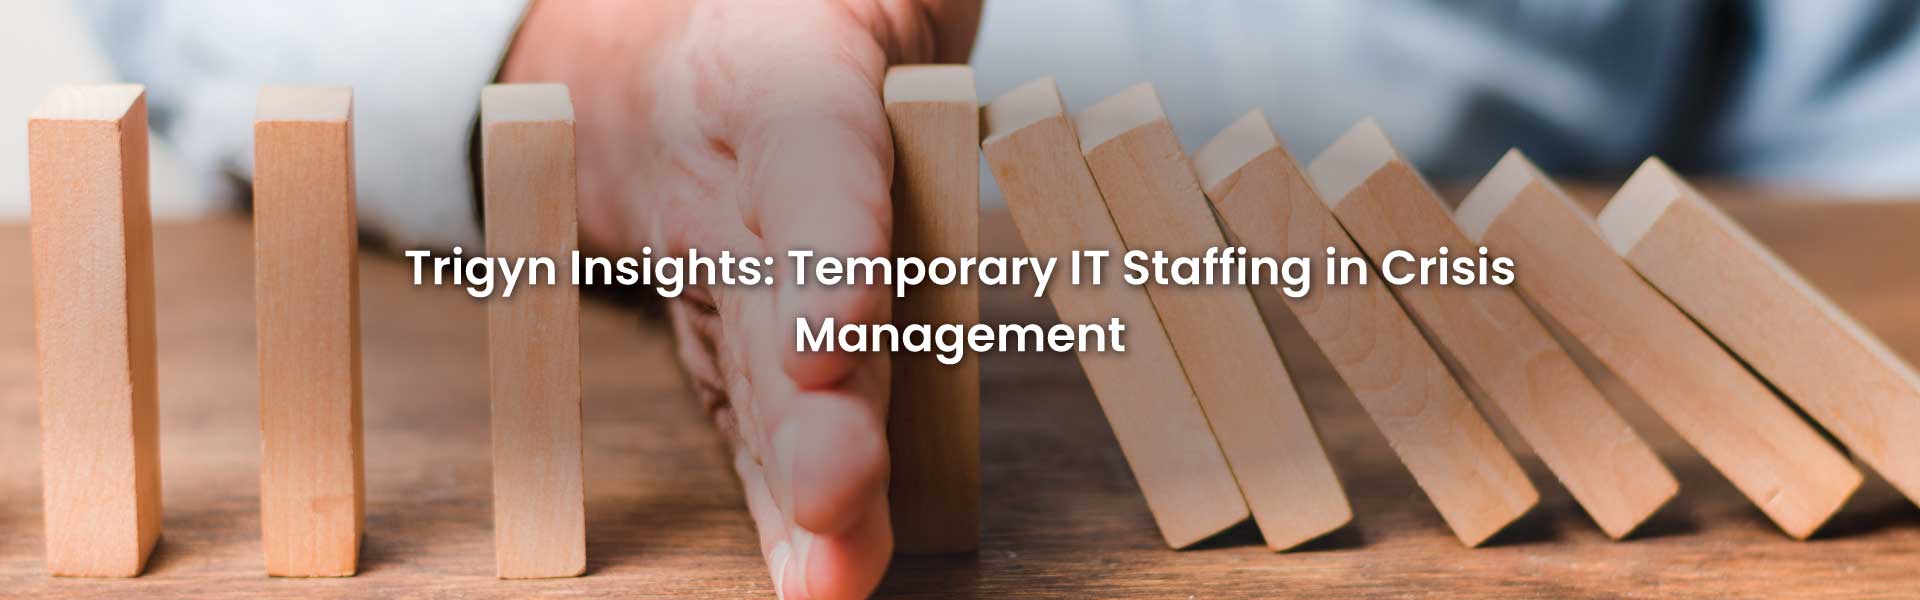  IT Staffing in Crisis Management